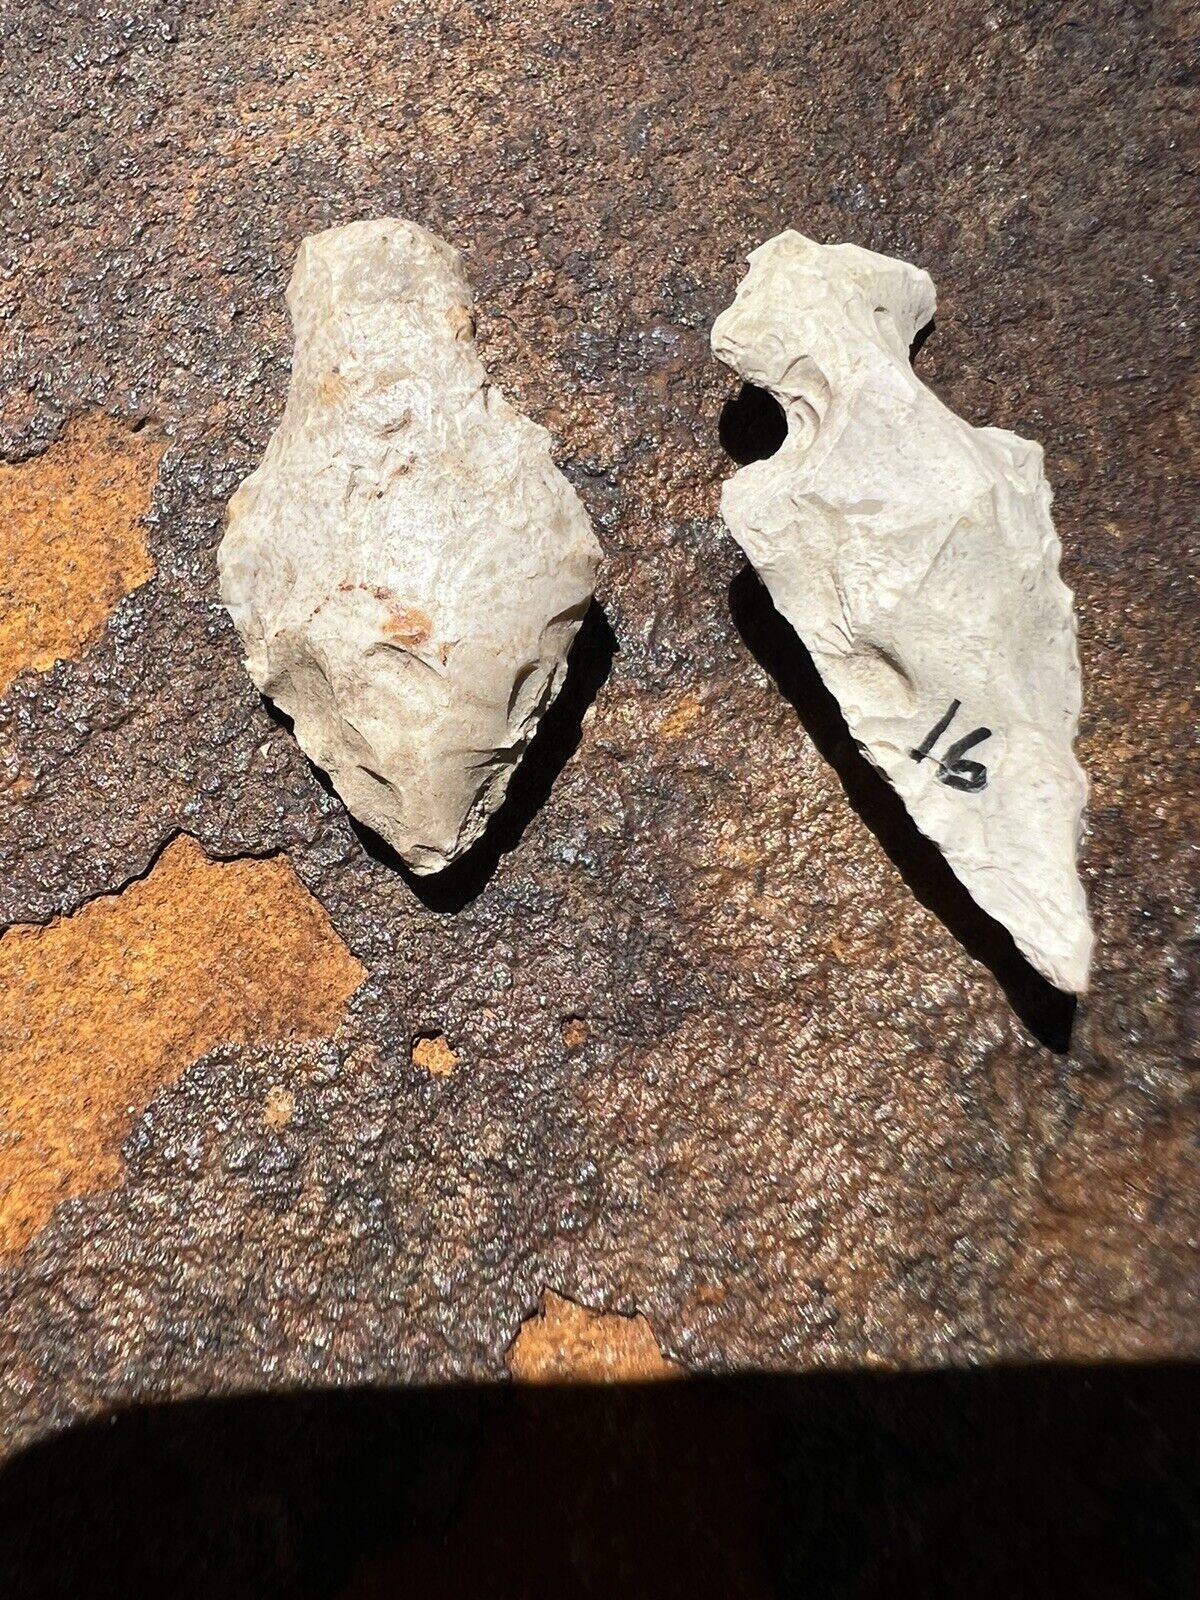 Two Authentic￼arrowheads, Sidenotched, Contracting Stem, Alachua County Florida